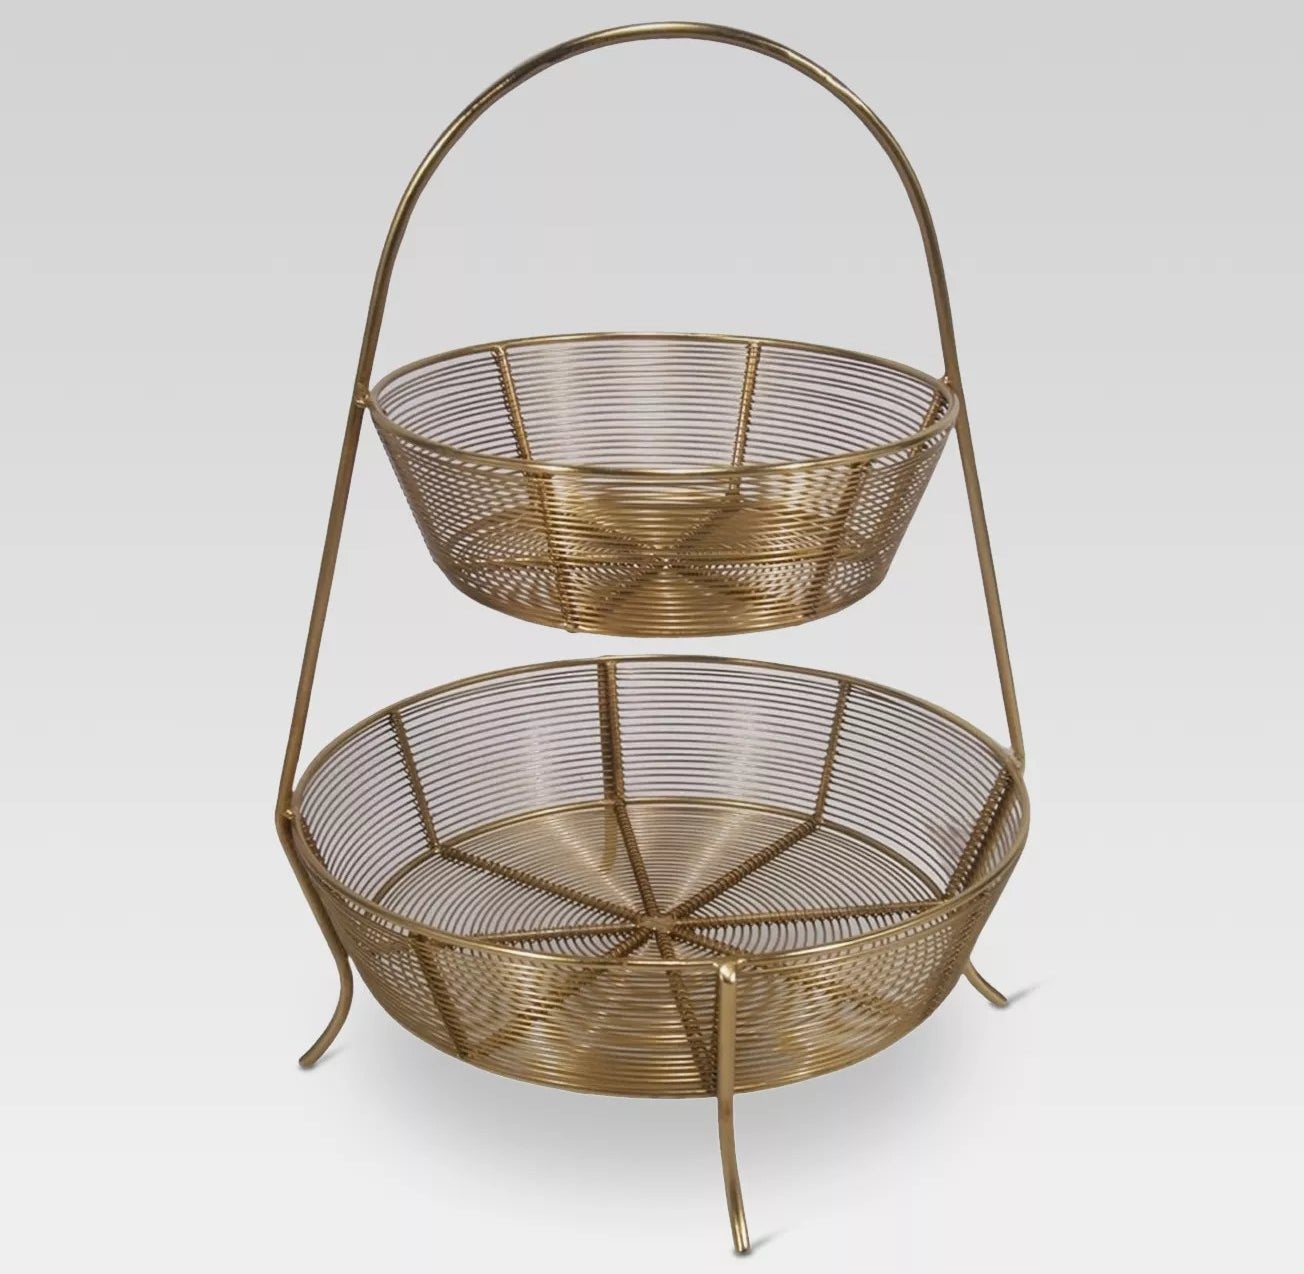 two-tiered wire basket